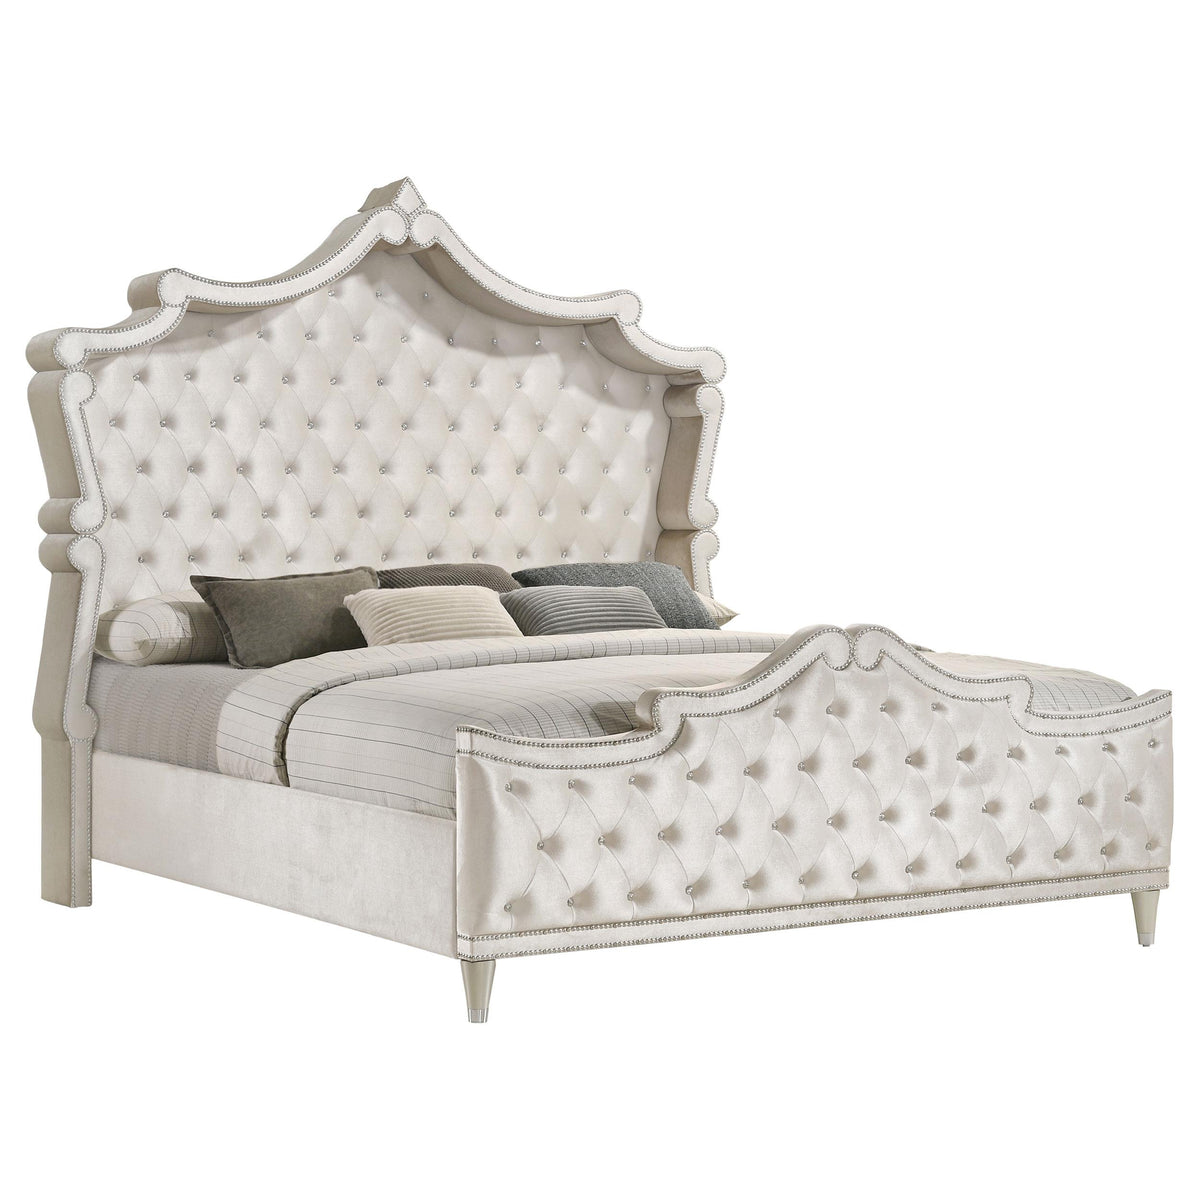 Antonella Upholstered Tufted California King Bed Ivory and Camel  Half Price Furniture